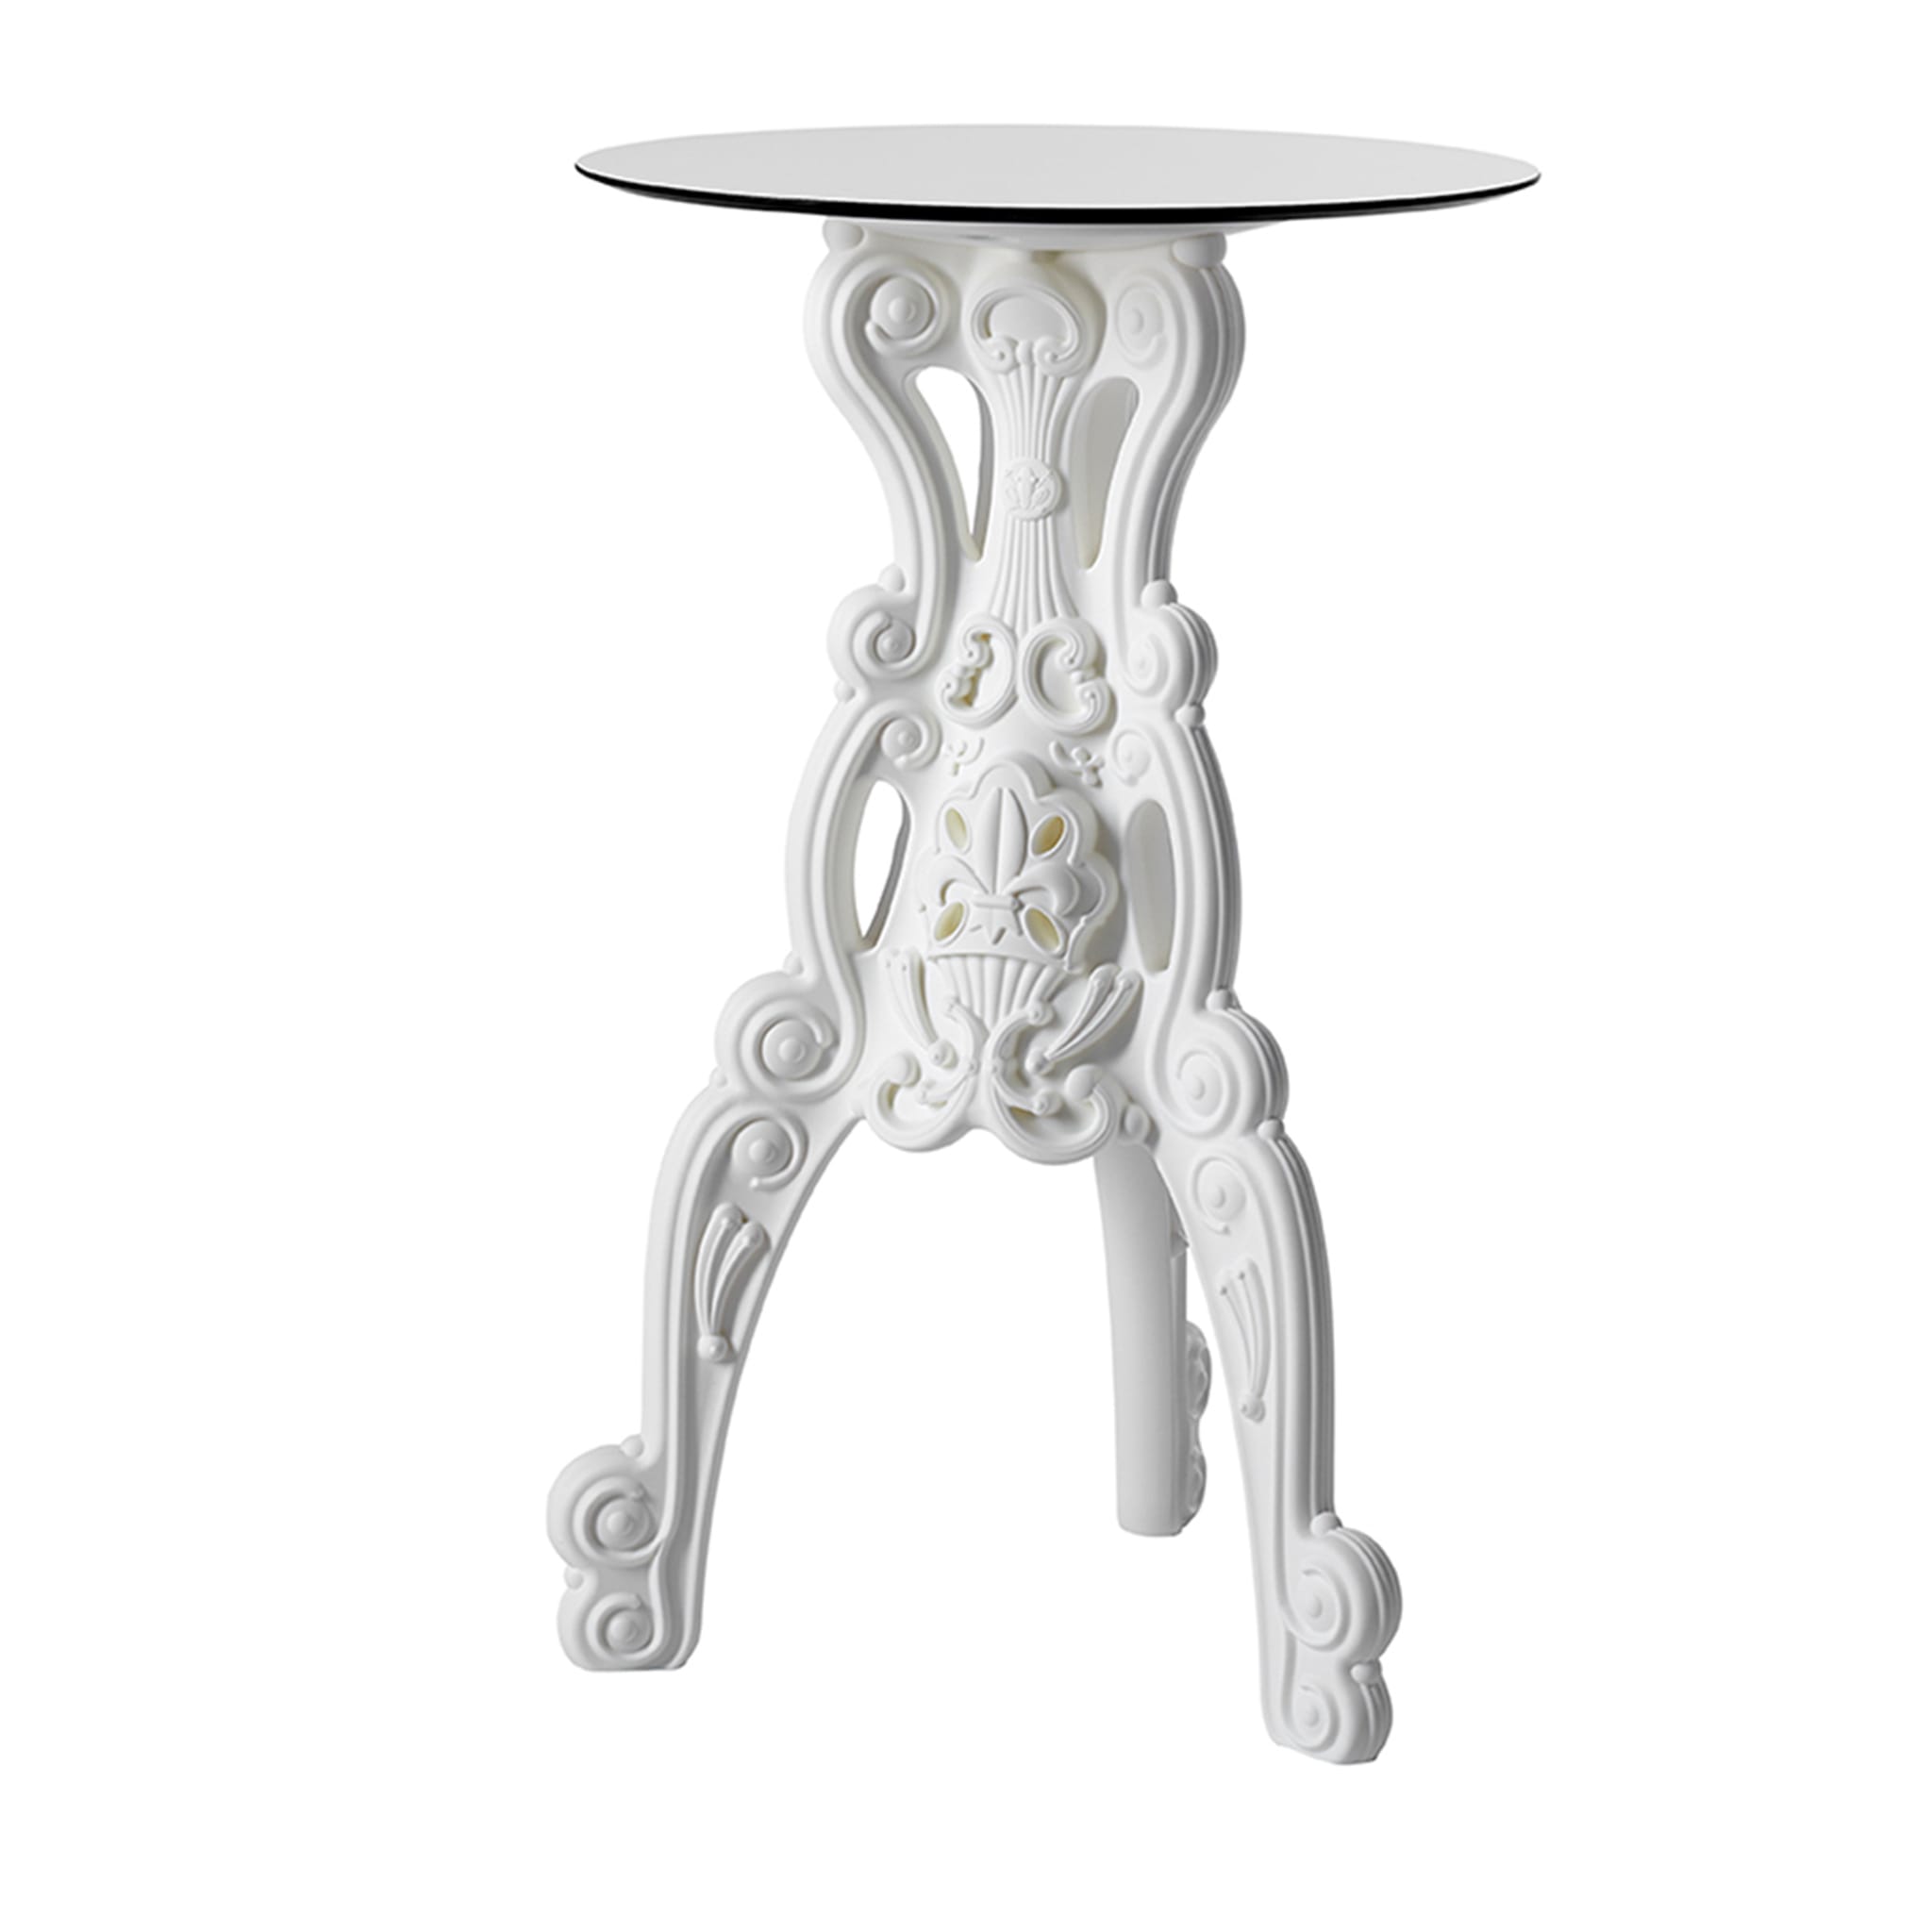 Master of Love White Bistro Table with Round Top - Main view